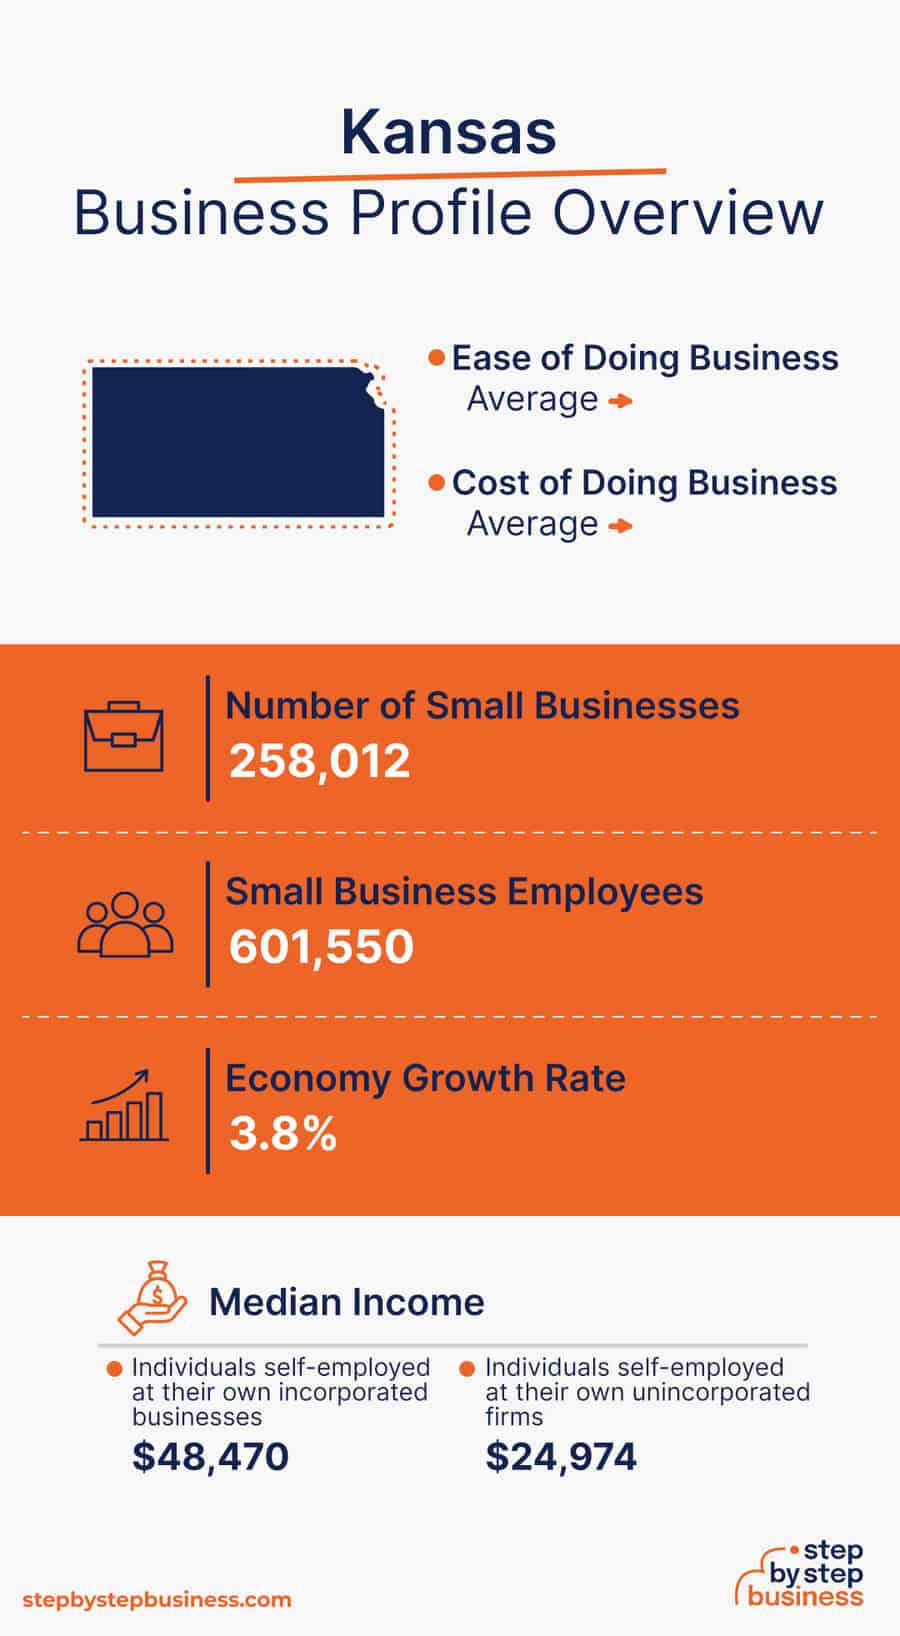 Kansas Business Profile Overview